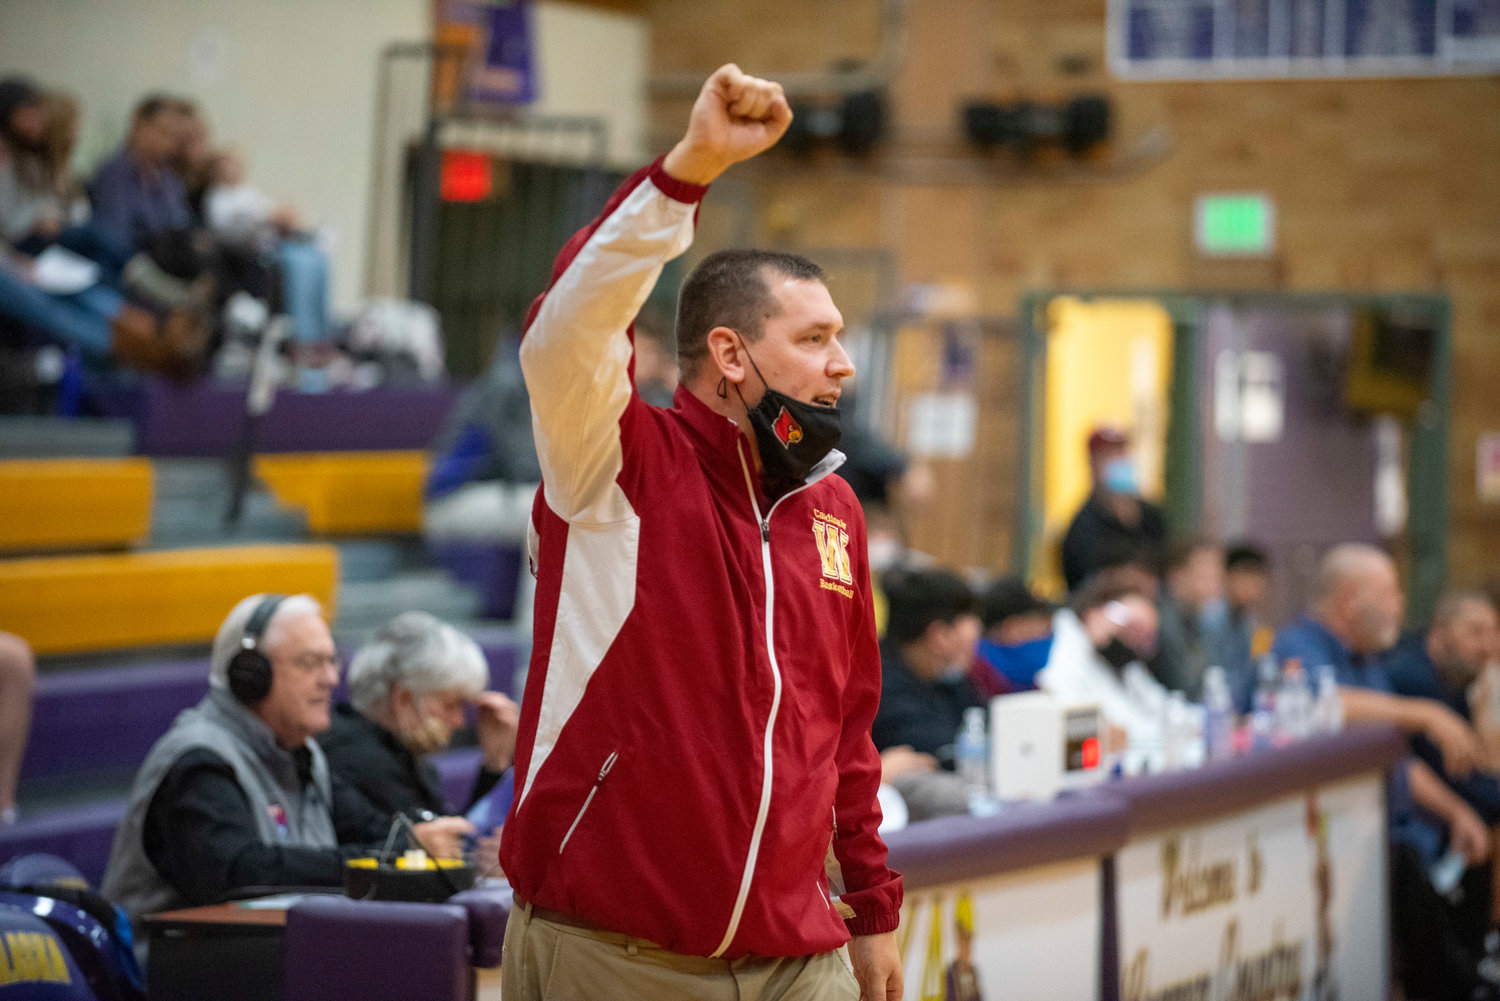 Winlock coach Nick Bamer raises his fist in celebration during a road game against Onalaska on Dec. 9.